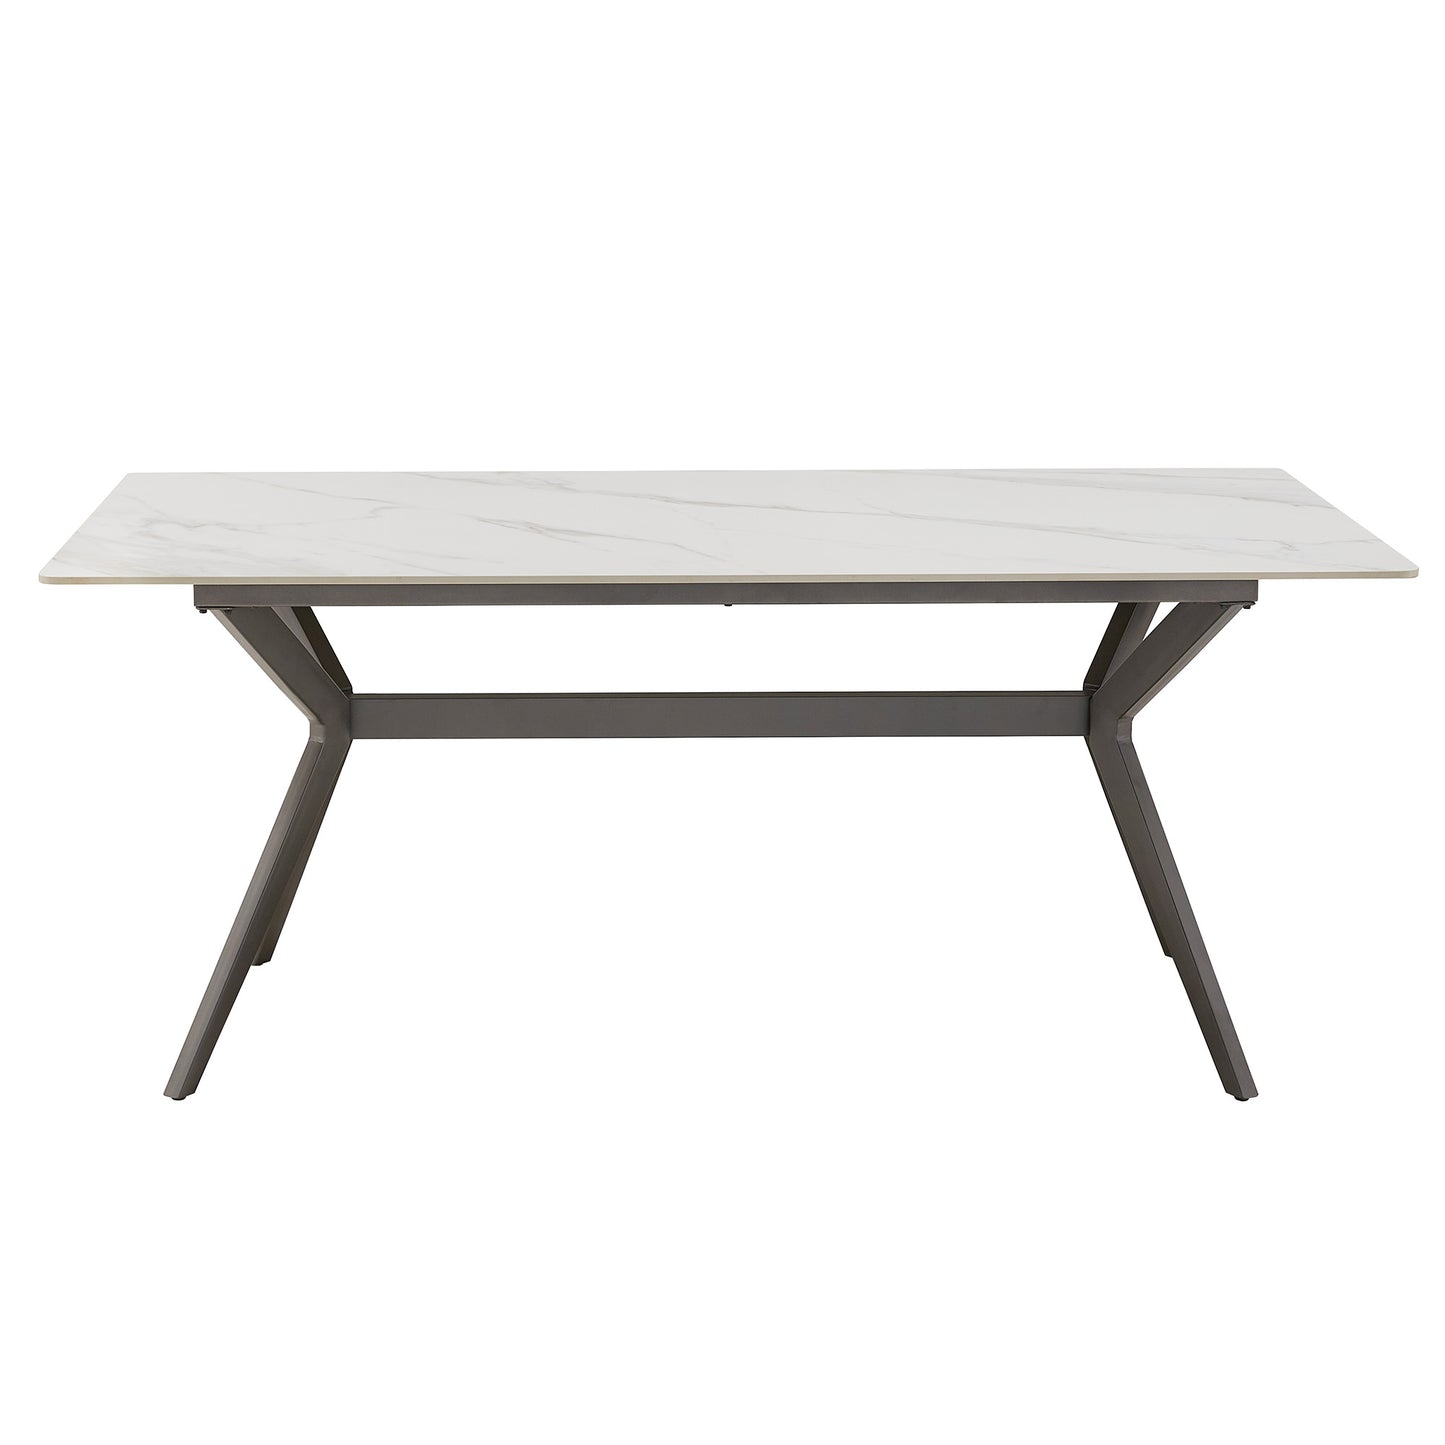 70" Iron Grey Metal Base 4-6 Person Dining Table - White Sintered Stone Top